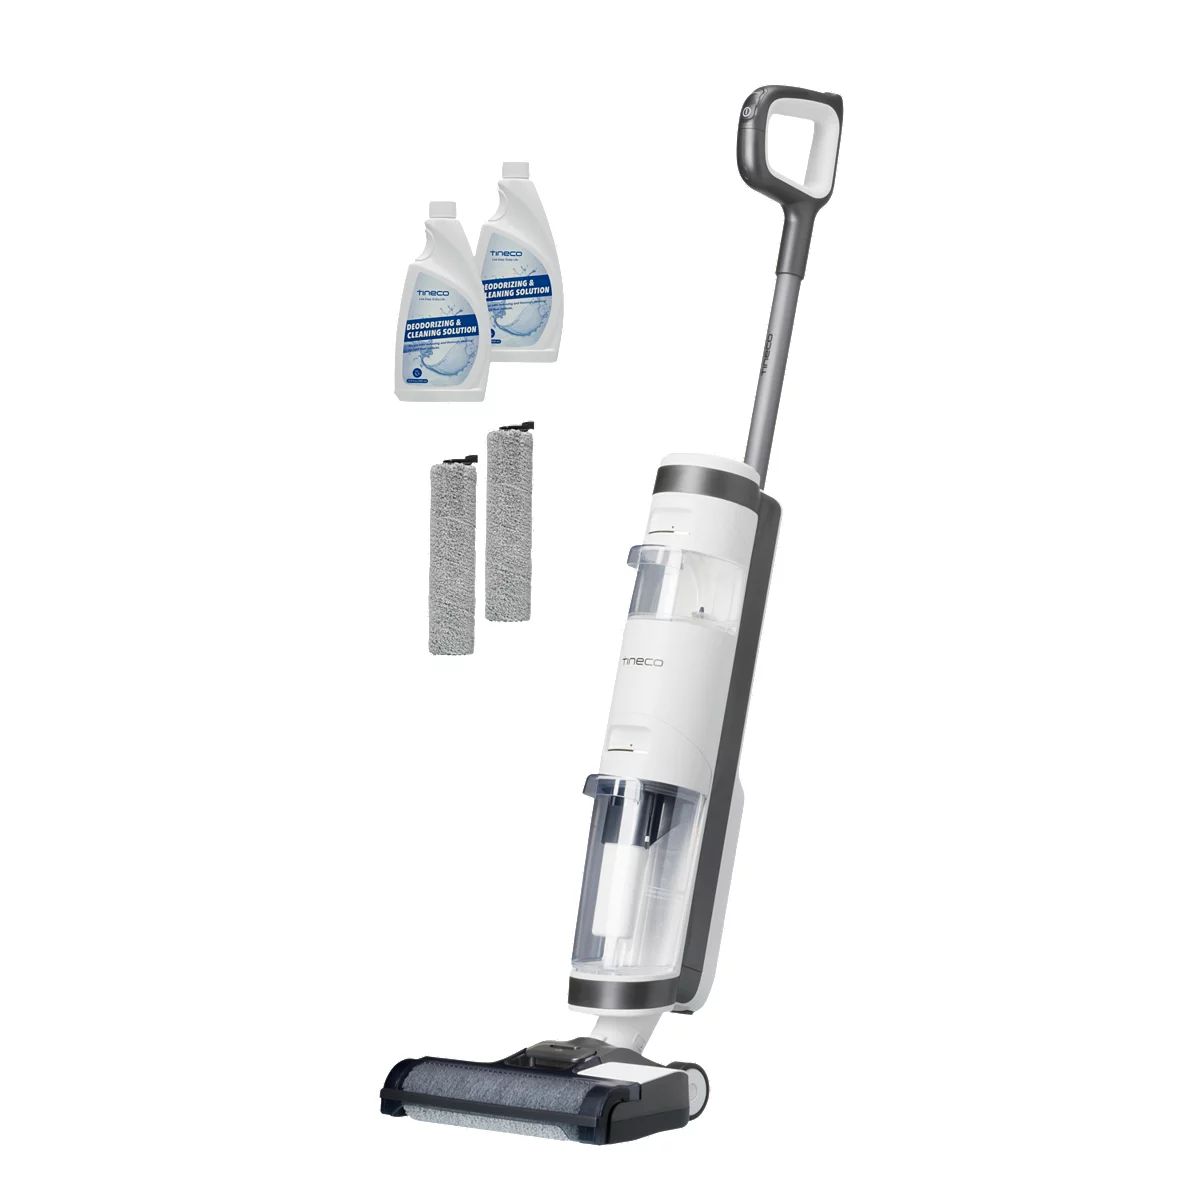 Tineco iFloor 3 Complete Cordless Wet/Dry Vacuum with Accessory Pack | Kohl's